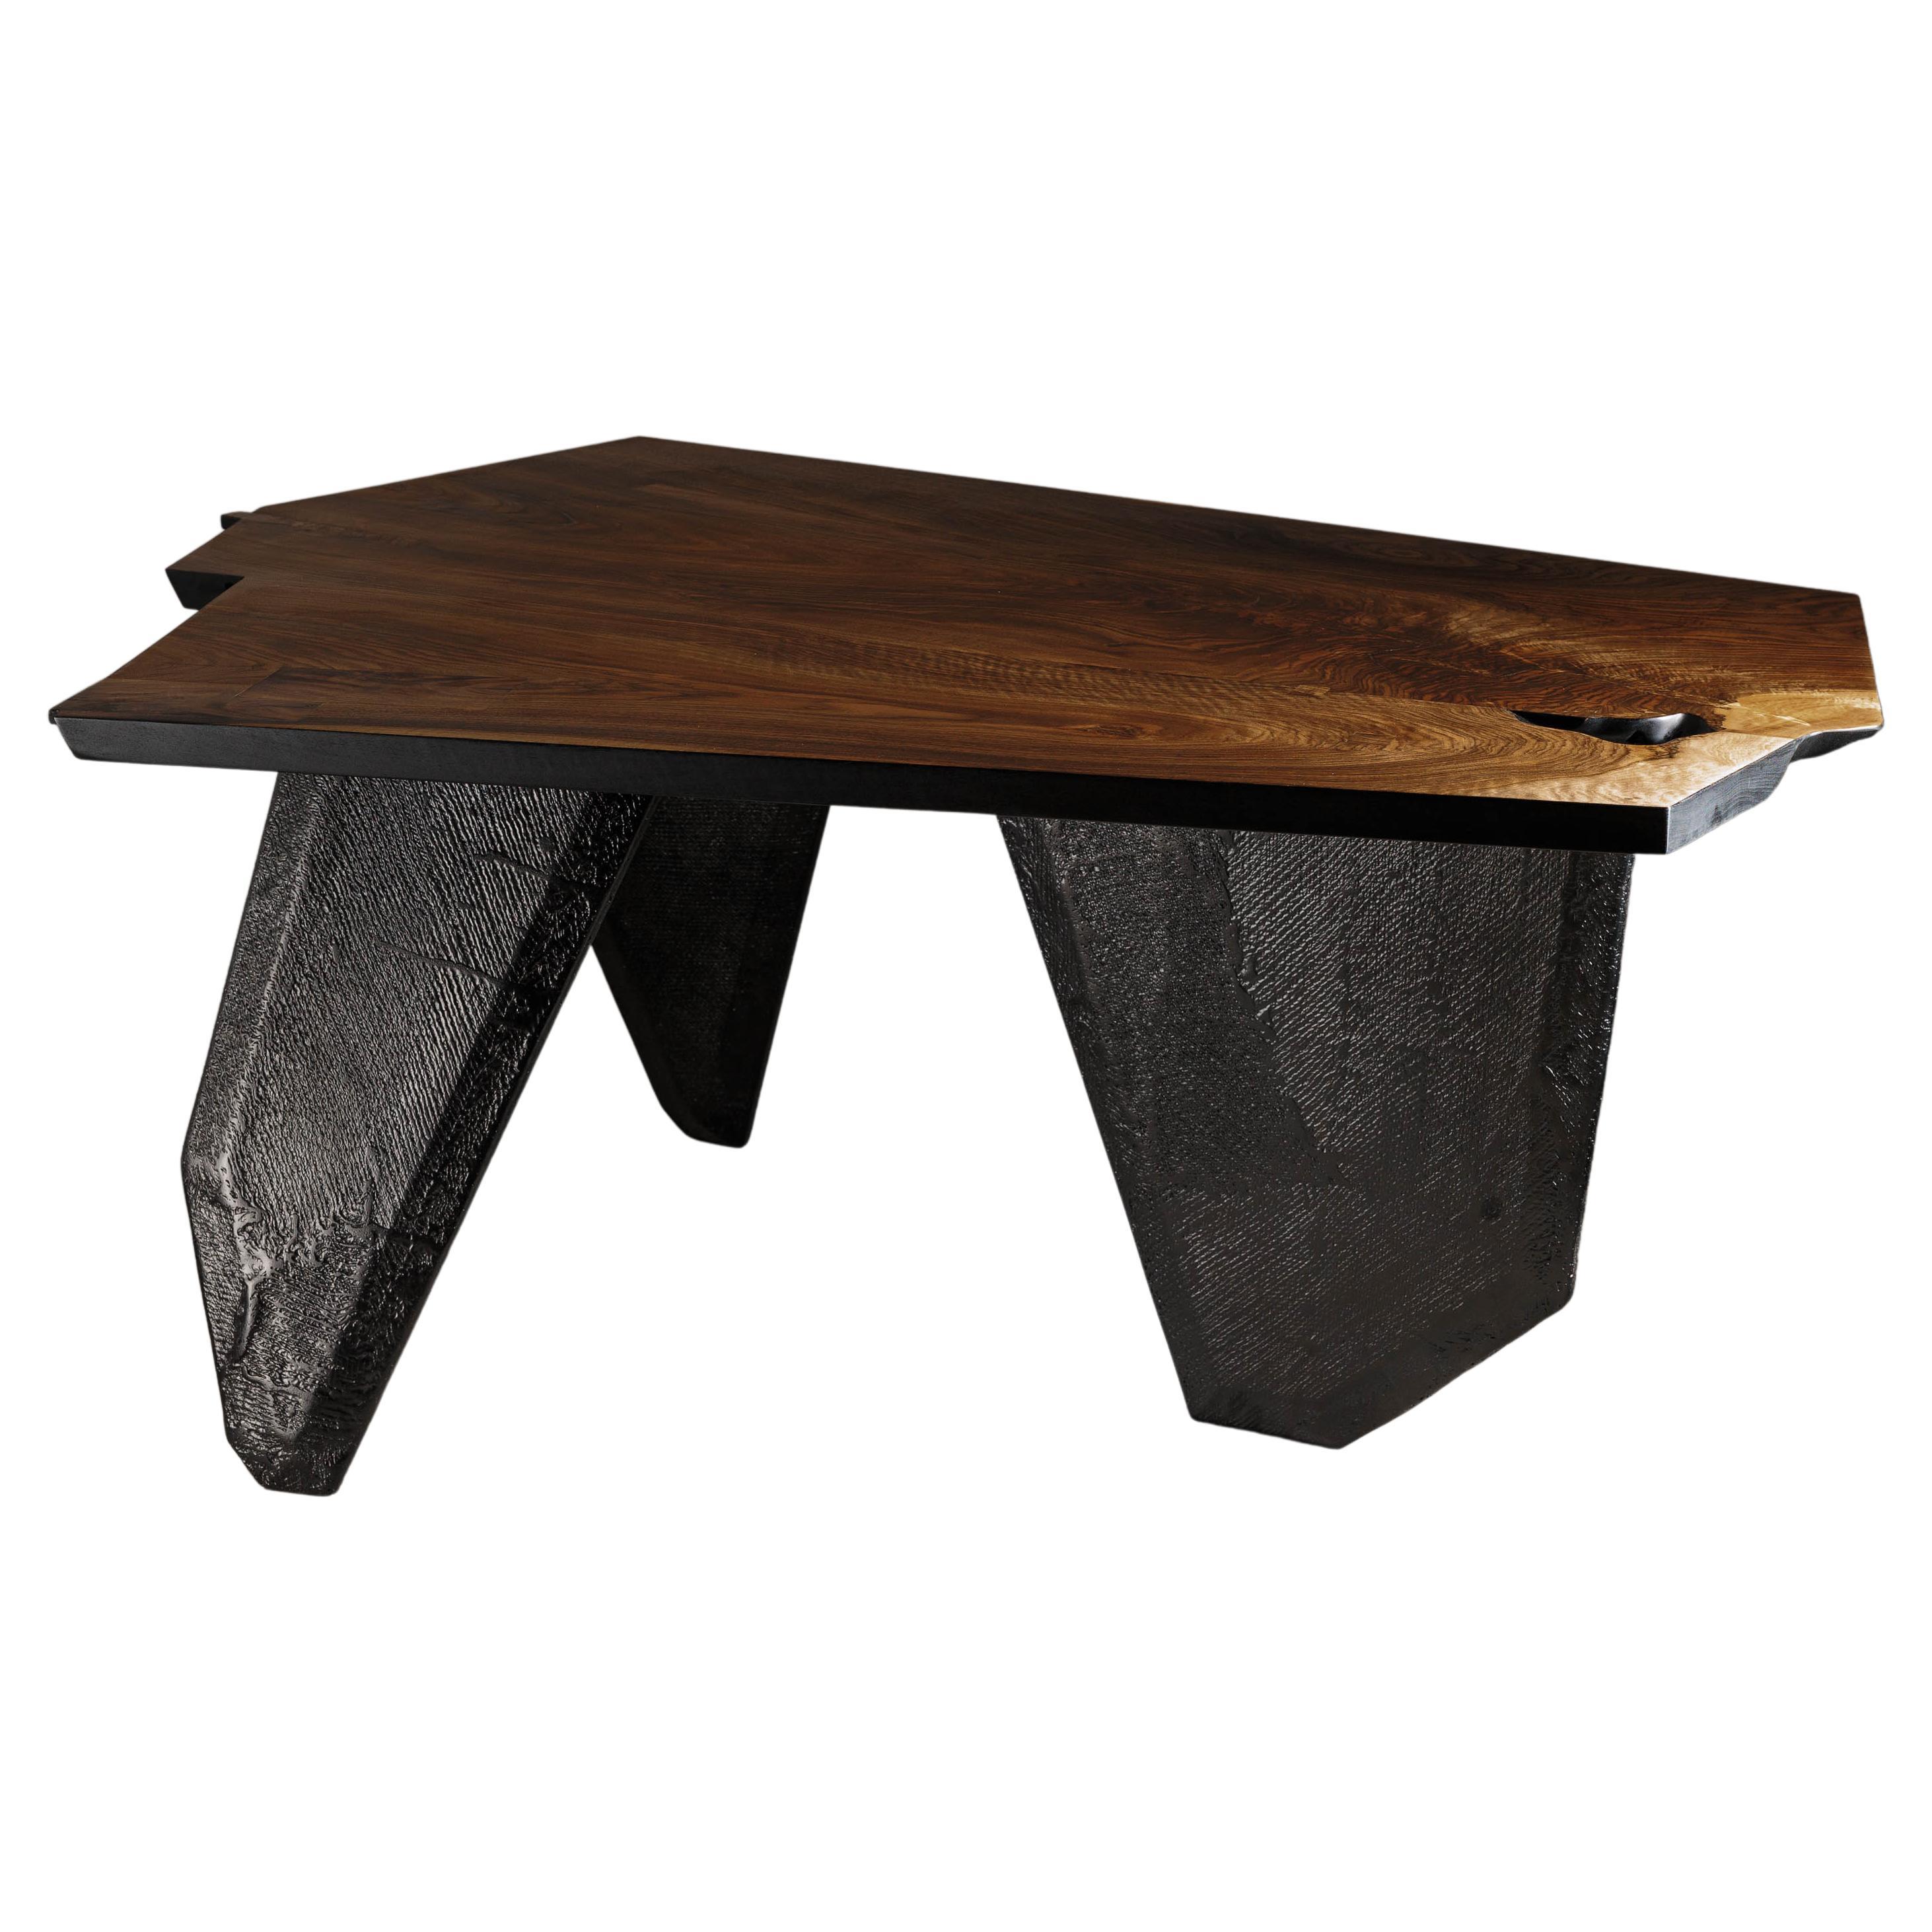 EM206 Dining Table by Eero Moss